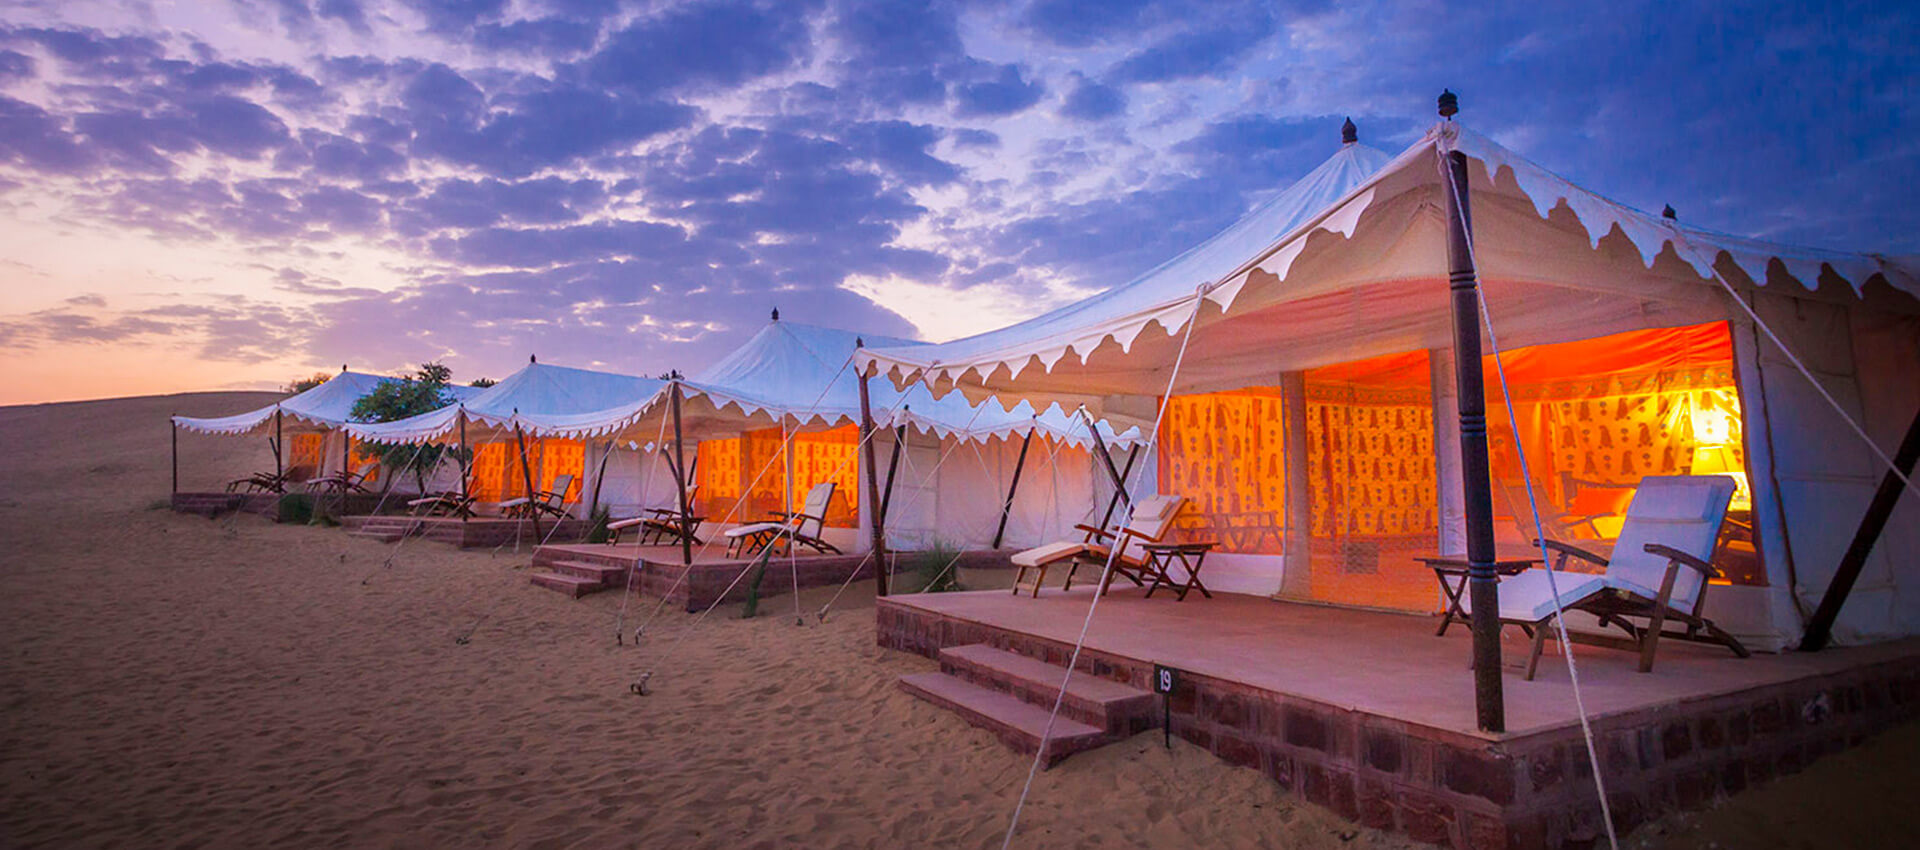 Luxury Rajasthan with Desert Camp